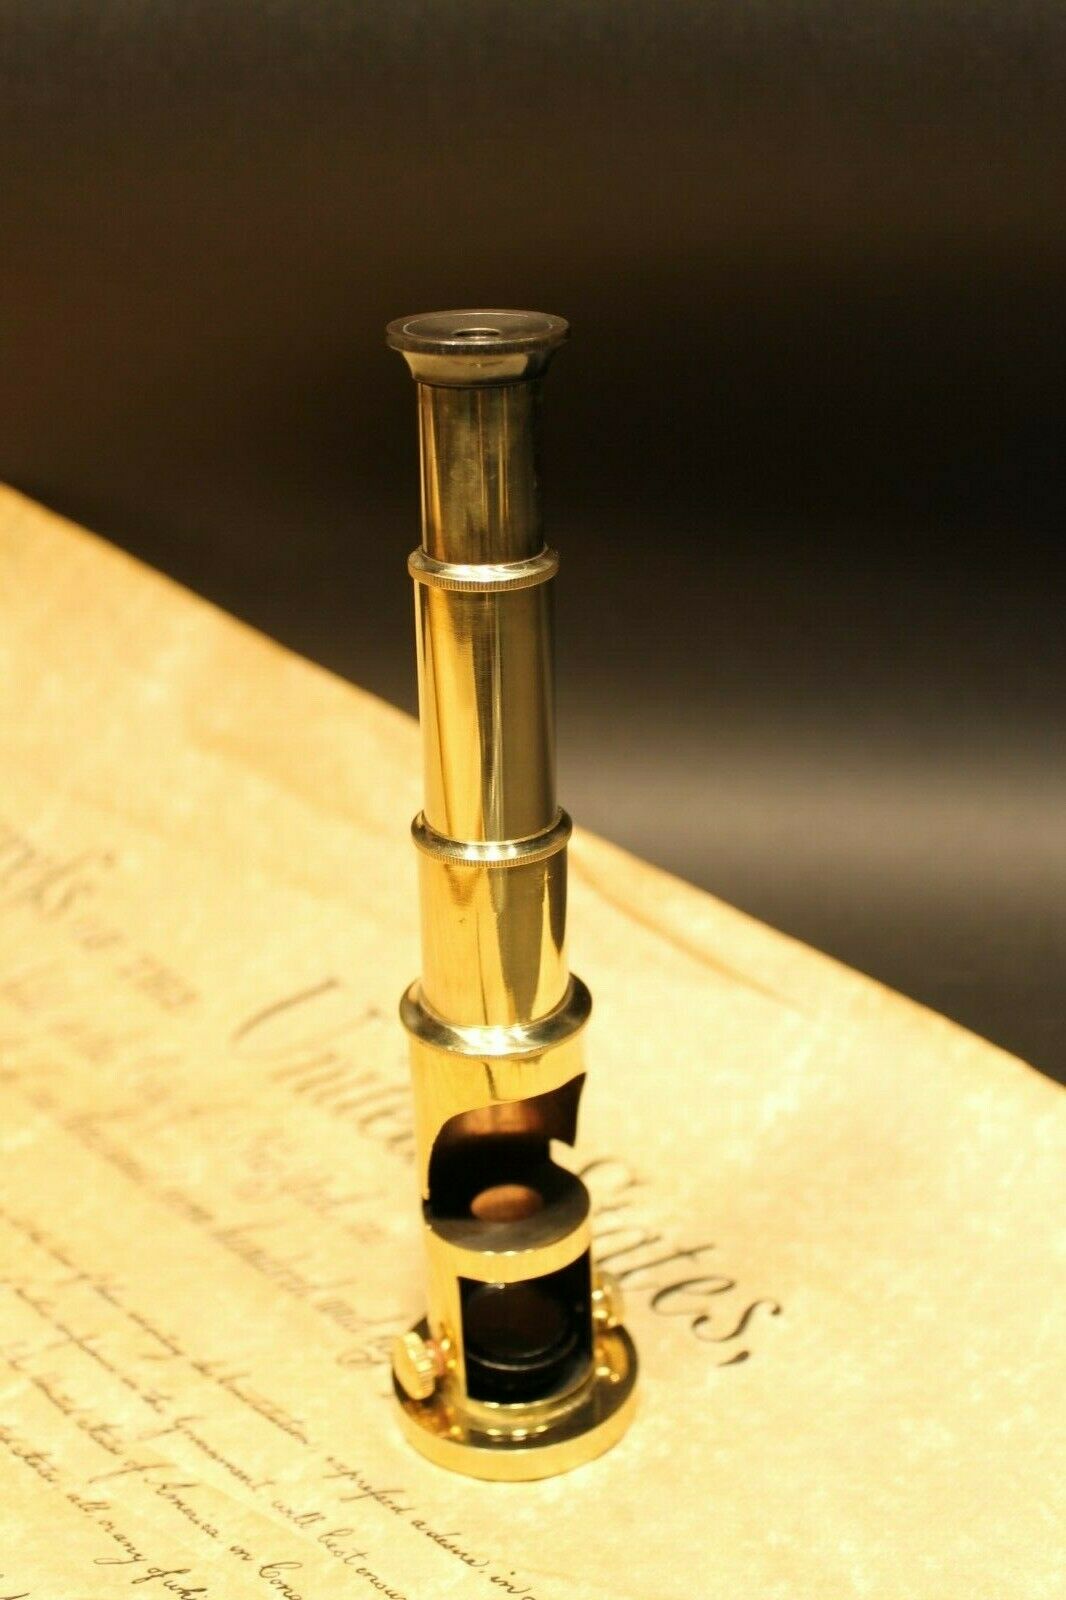 Brass Portable Microscope Antique Vintage Style - Early Home Decor